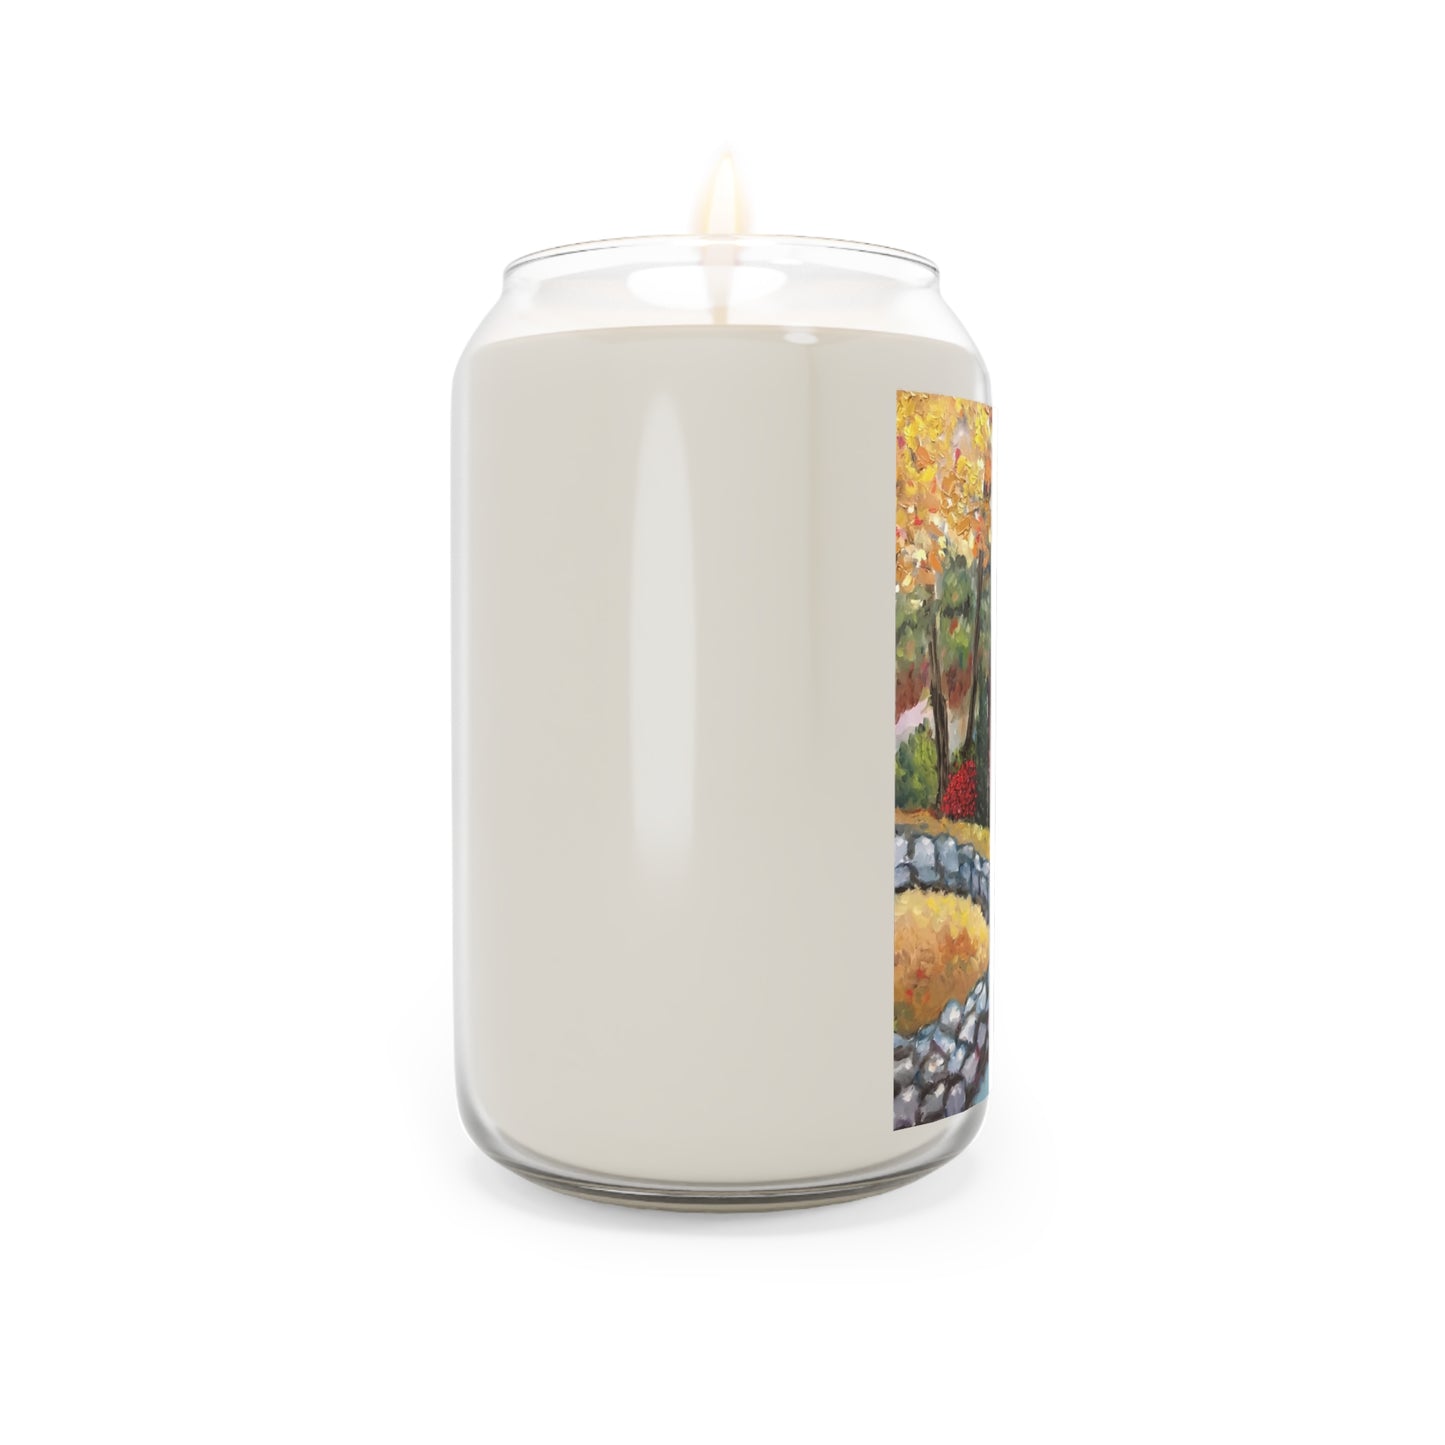 Autumn Barn Scented Candle, 13.75oz